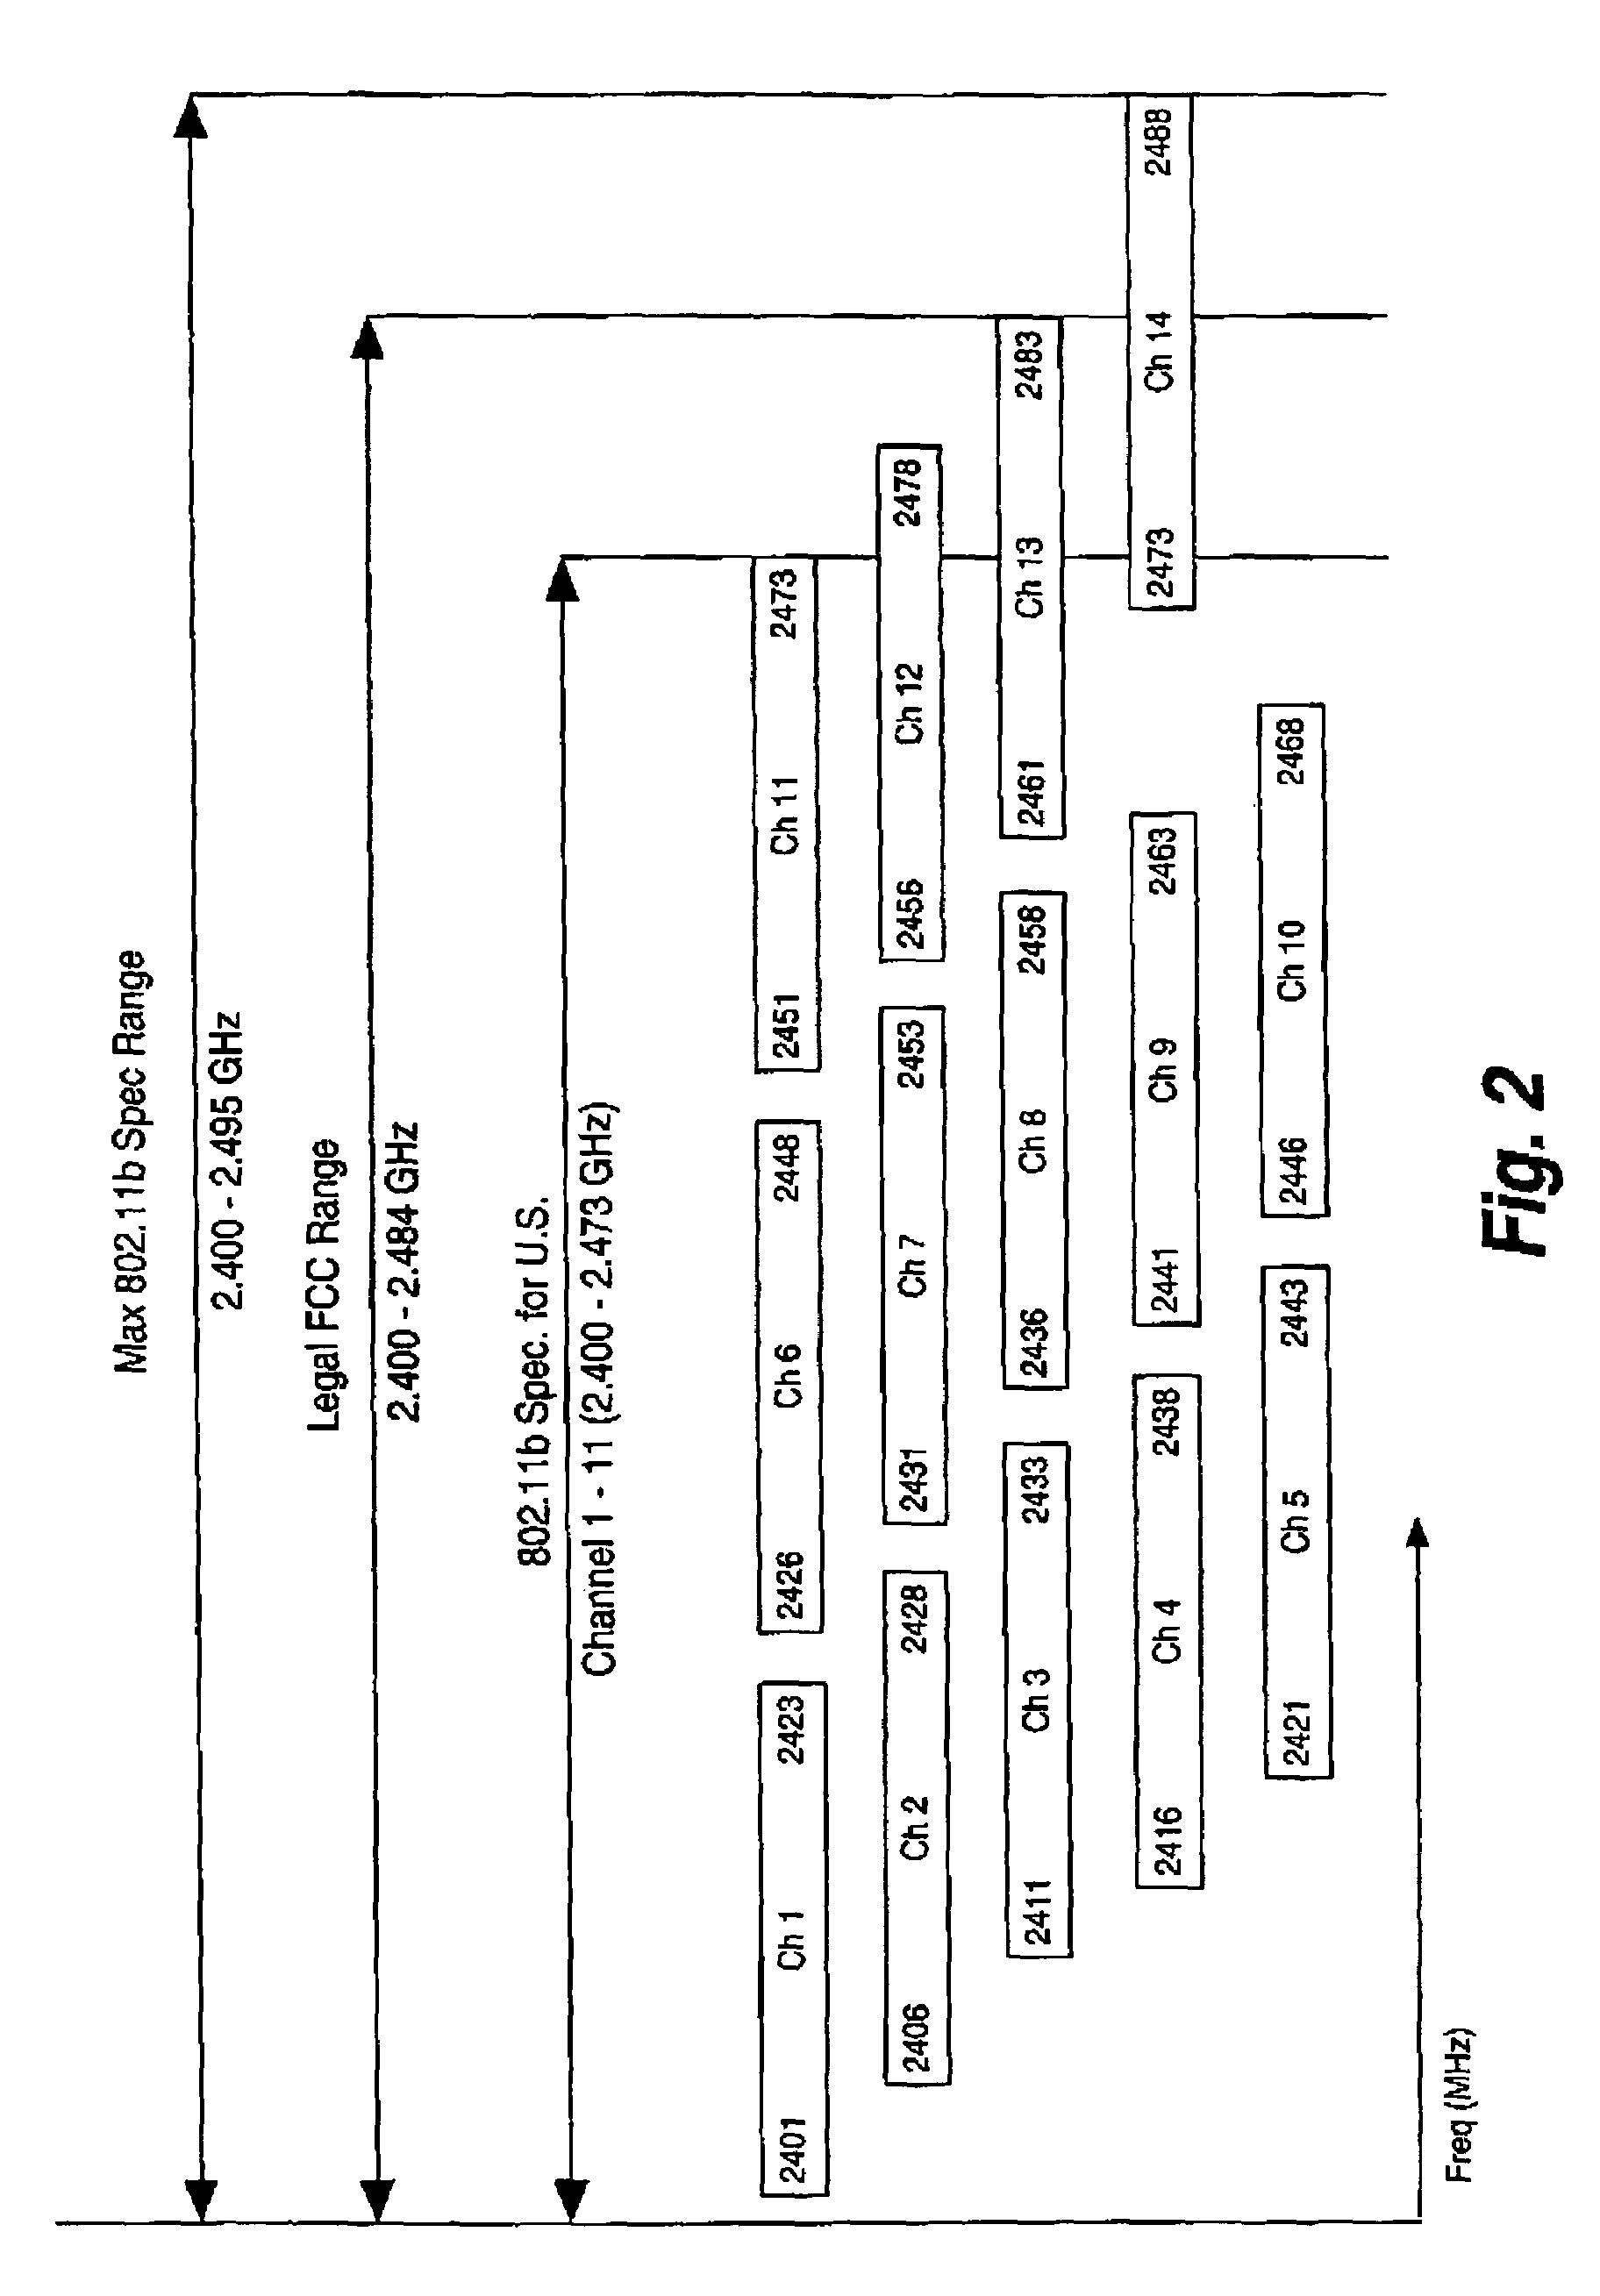 System and method for passive scanning of authorized wireless channels